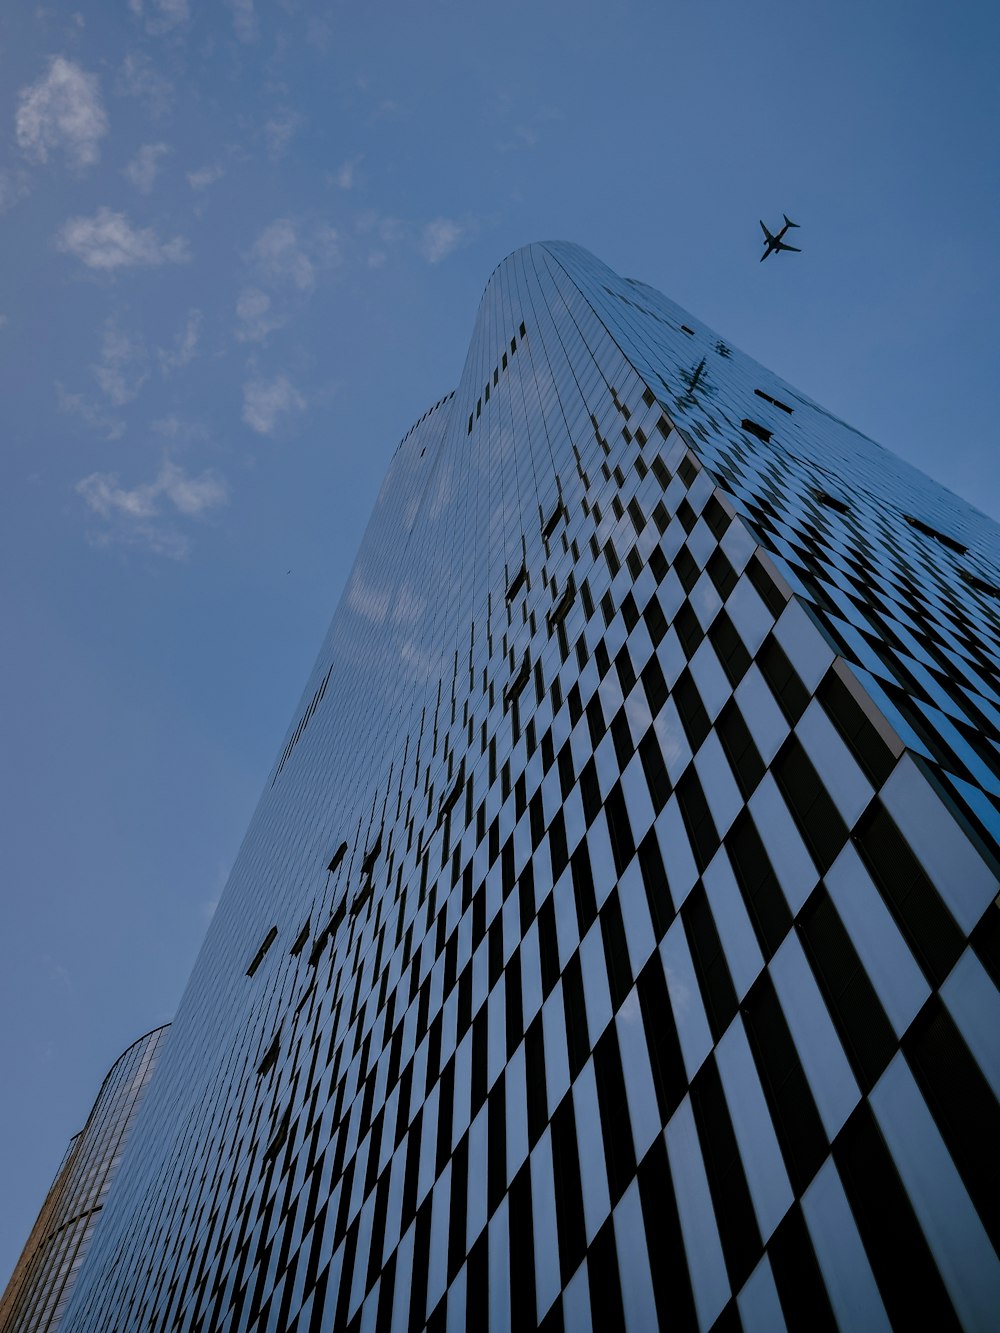 a plane flying over a tall building with a checkerboard design